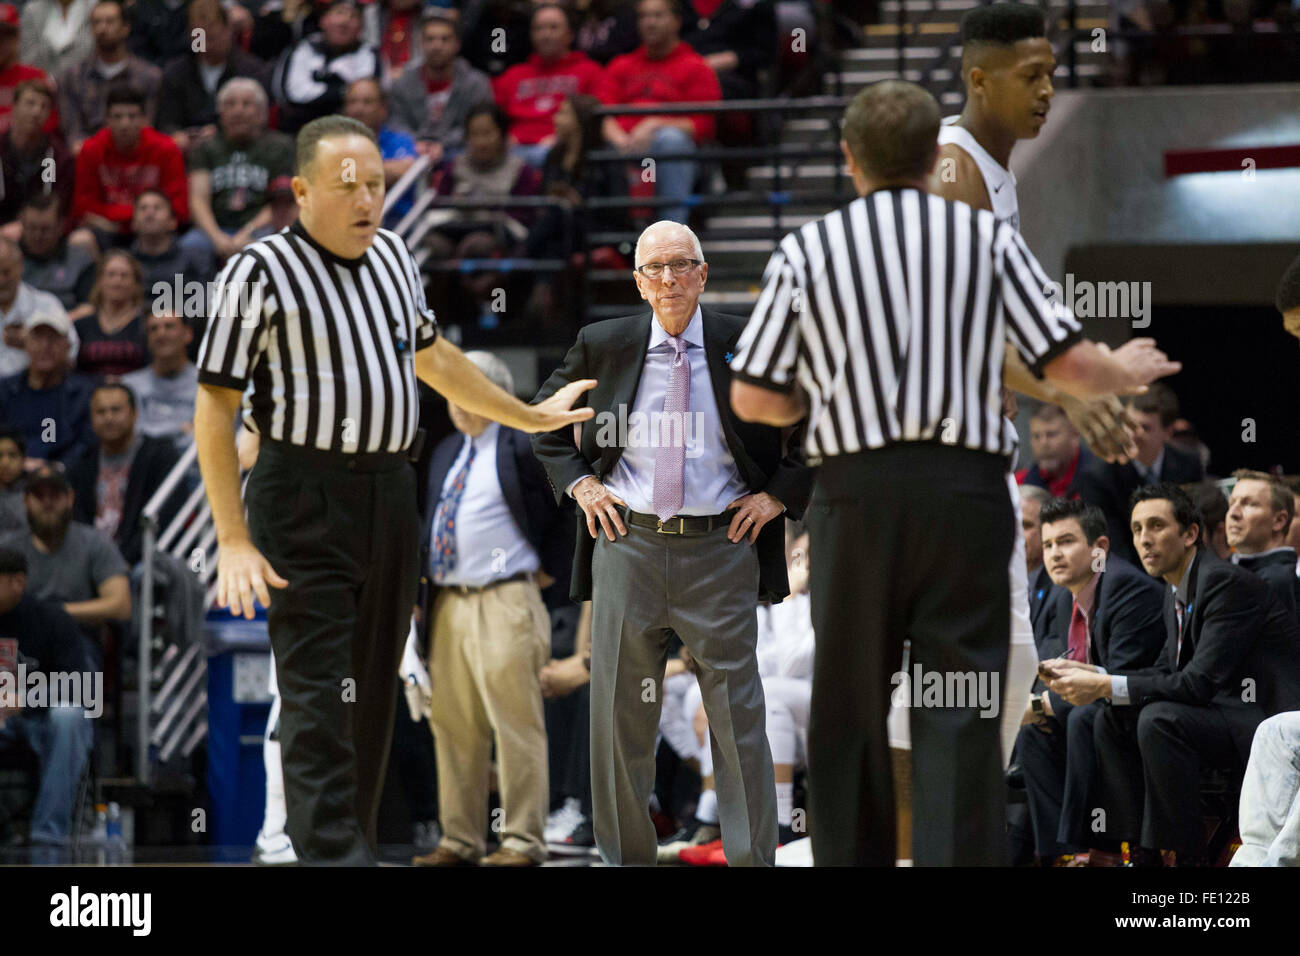 San Diego, California, USA. 2nd Feb, 2016. February 2, 2016] SDSU head coach Steve Fisher argues with the referees in the first half of Tuesday's game between San Diego State University and Colorado State University. Chadd Cady/For The San Diego Union-Tribune © Chadd Cady/U-T San Diego/ZUMA Wire/Alamy Live News Stock Photo